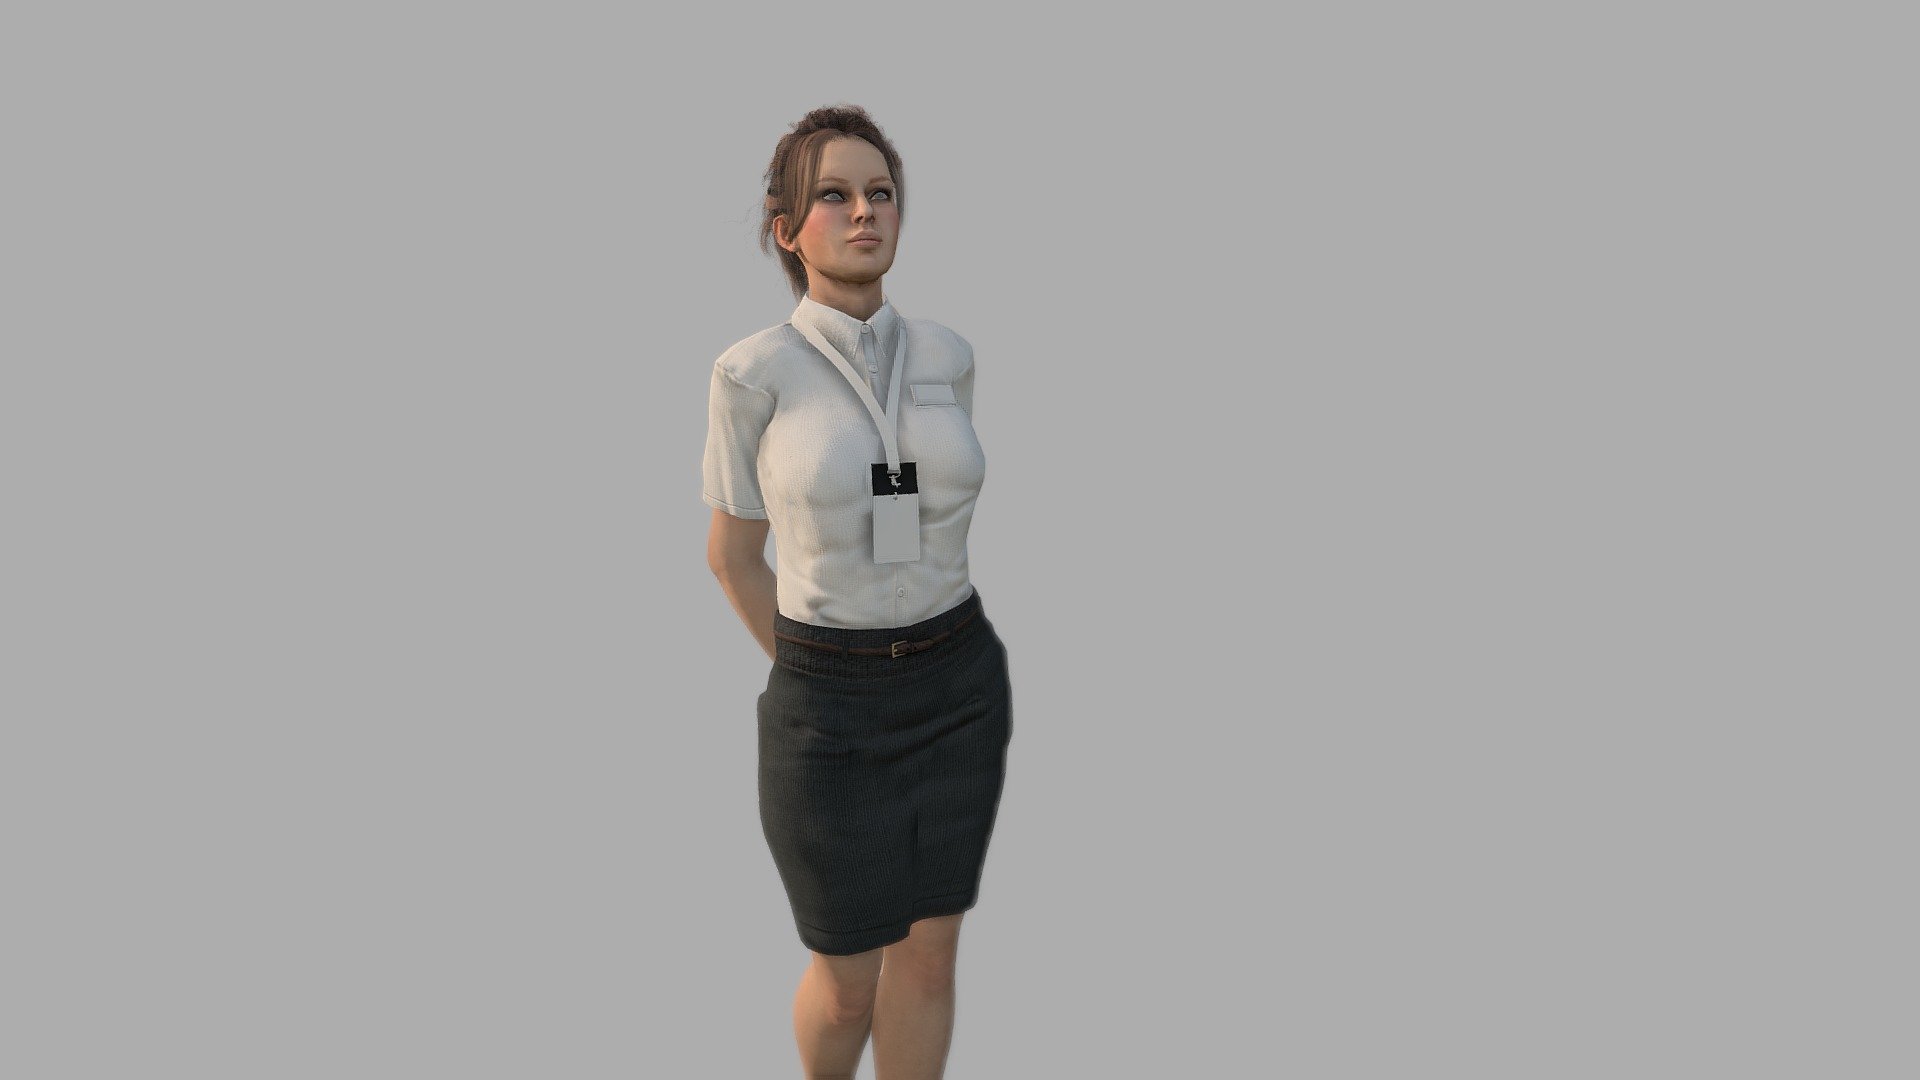 Airhostess character made in Character Creator 3 3d model